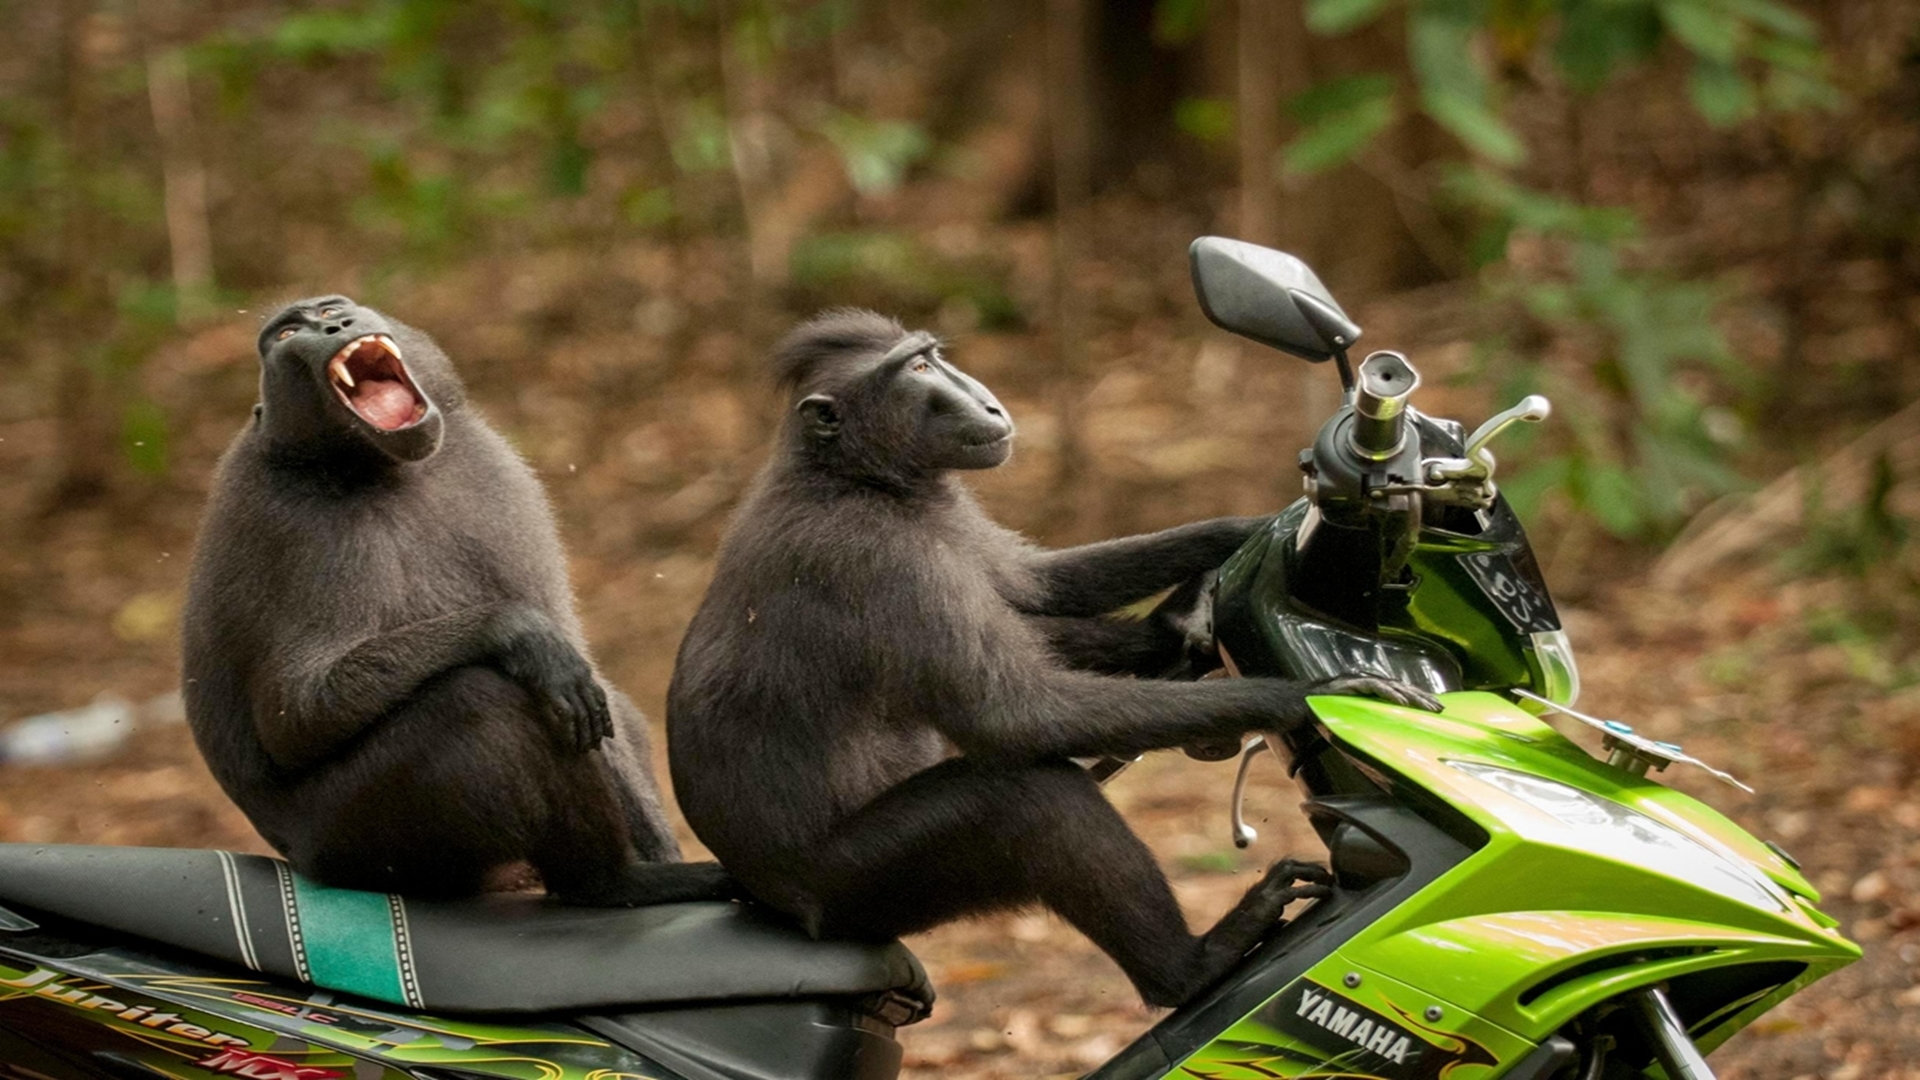 General 1920x1080 nature animals depth of field humor muzzles motorcycle macaques Indonesia profile side view open mouth scooters Yamaha Japanese motorcycles